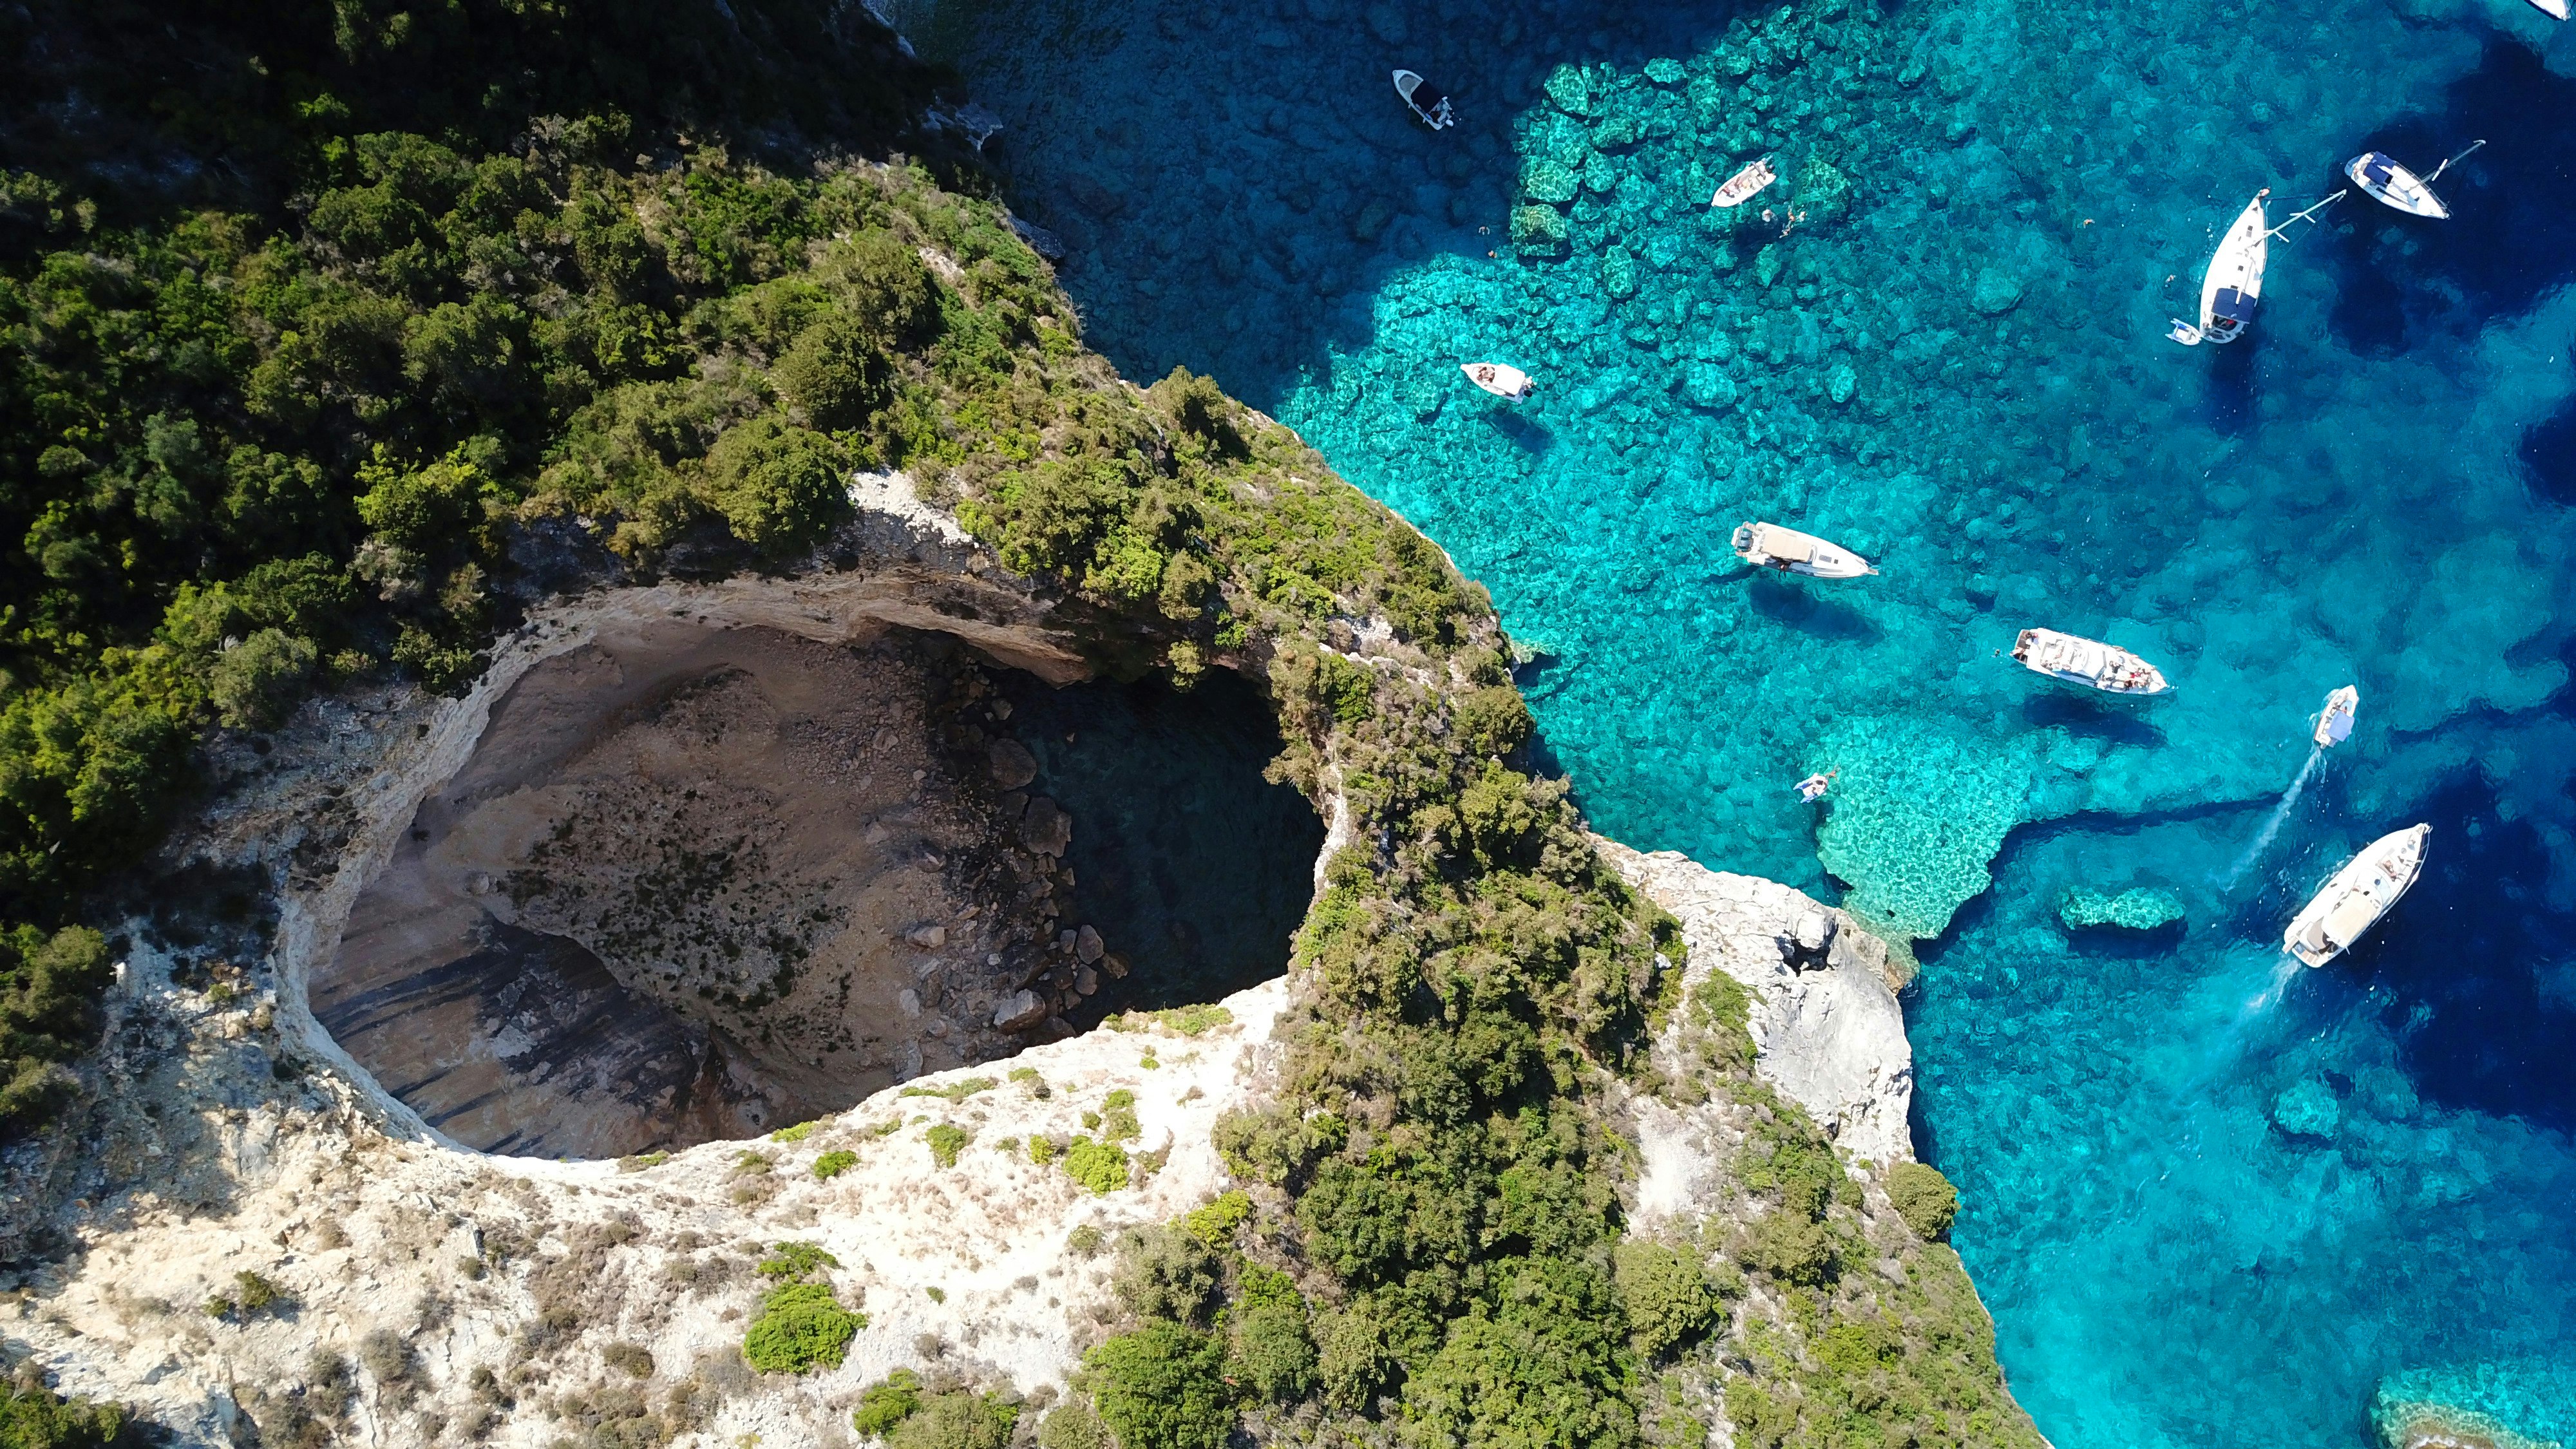 Imagine yourself on a yacht, drifting over the serene azure waters of the Ionian Sea, where the pristine islands of Paxos and Antipaxos emerge as jewels of unspoiled beauty and tranquil charm. You are about to set sail into paradise.